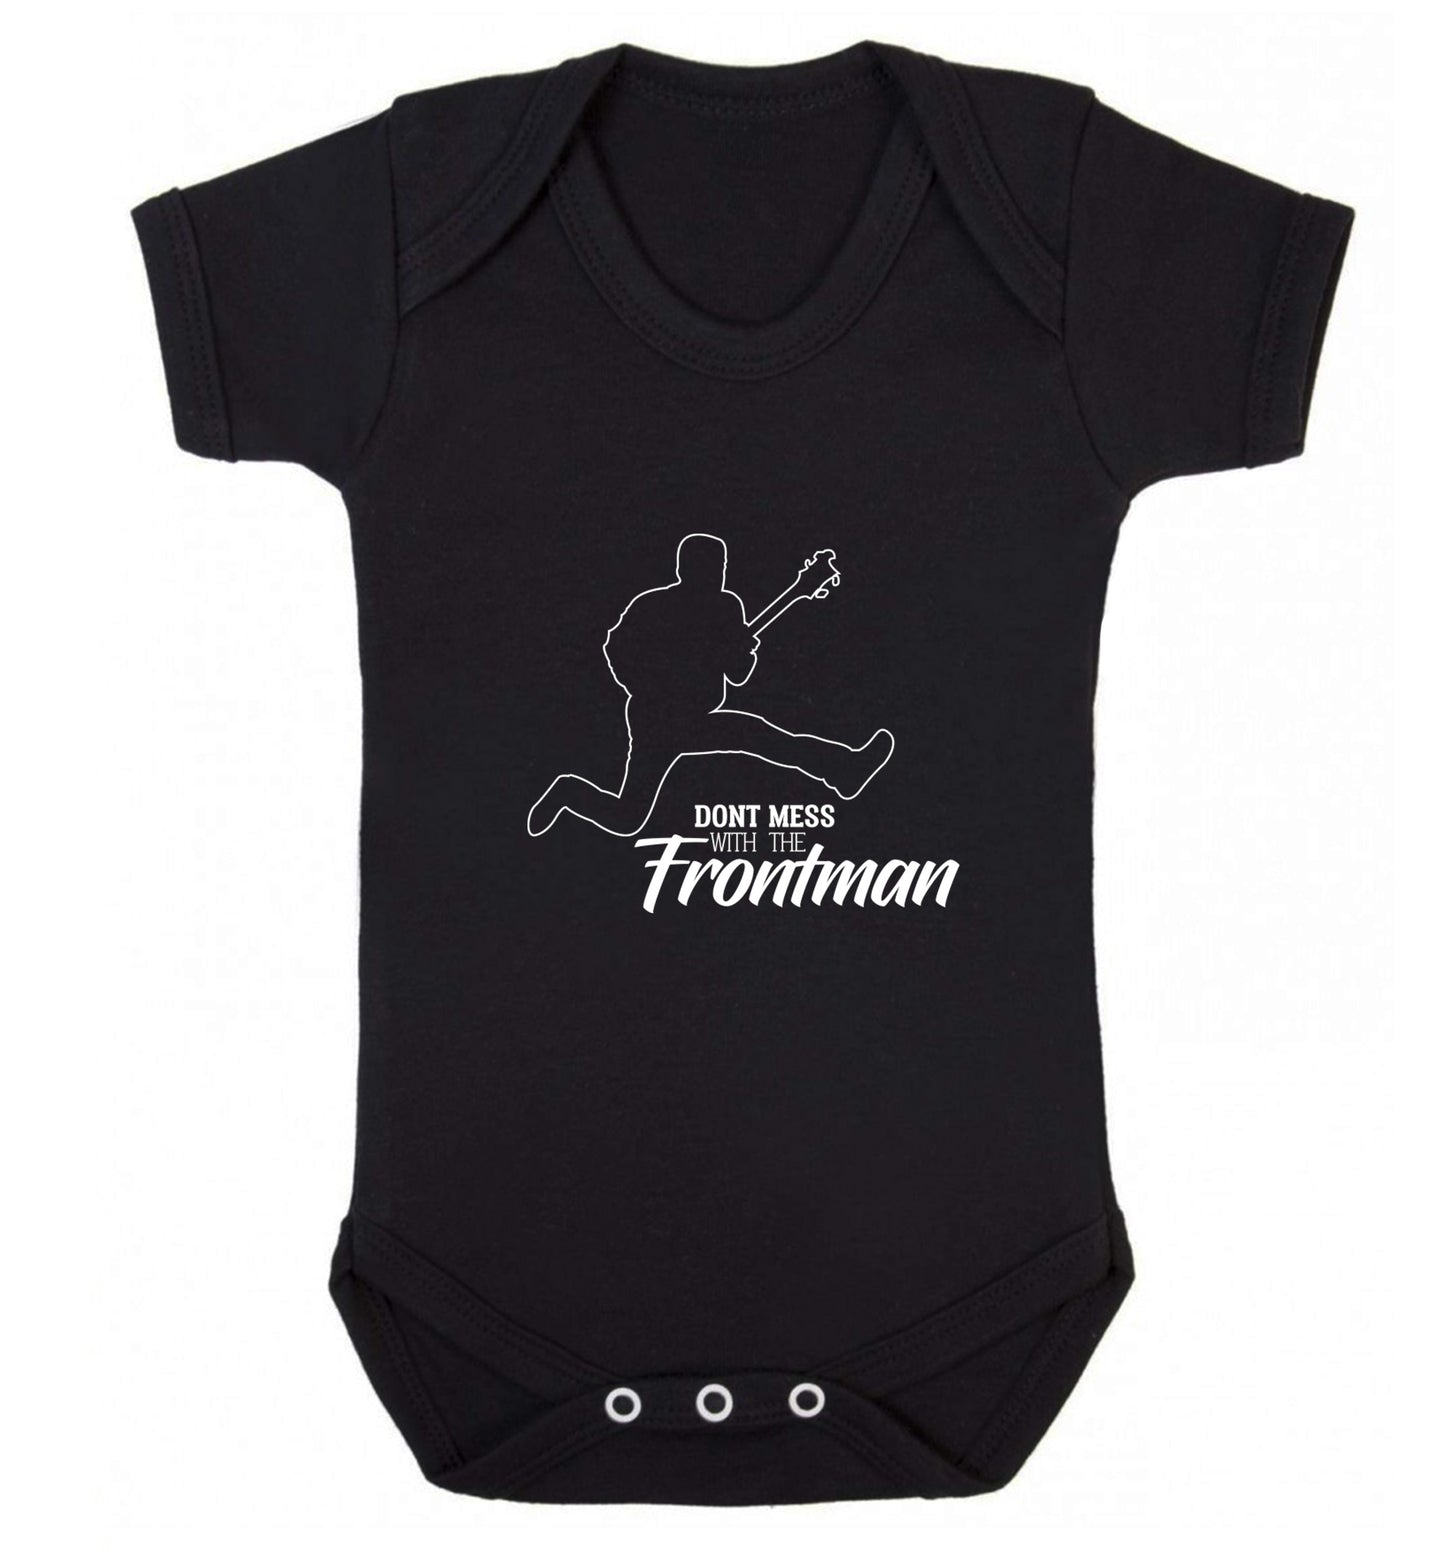 Don't mess with the frontman Baby Vest black 18-24 months